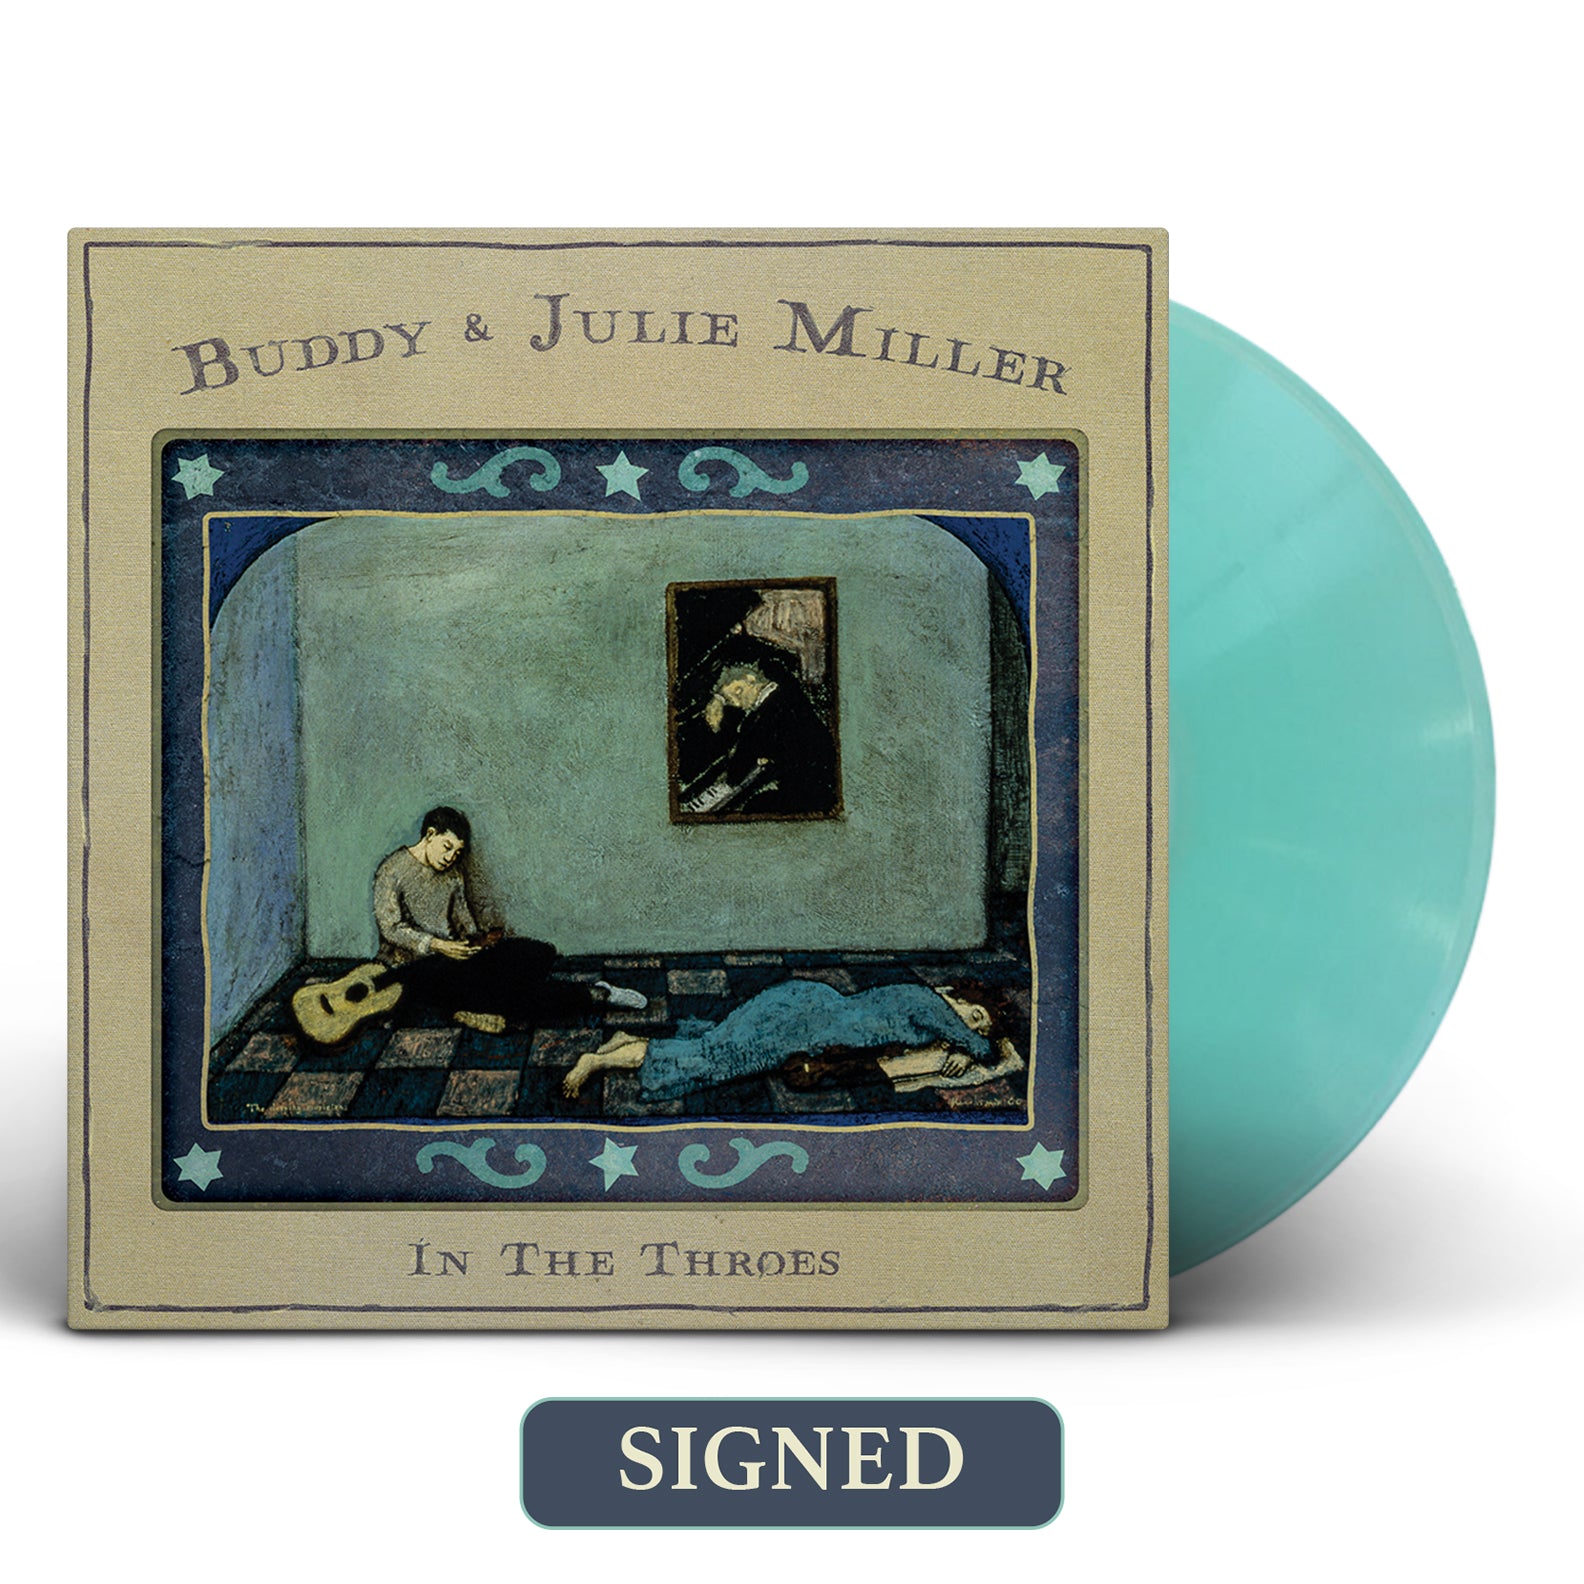 Buddy & Julie Miller - In The Throes [SIGNED Color Vinyl]